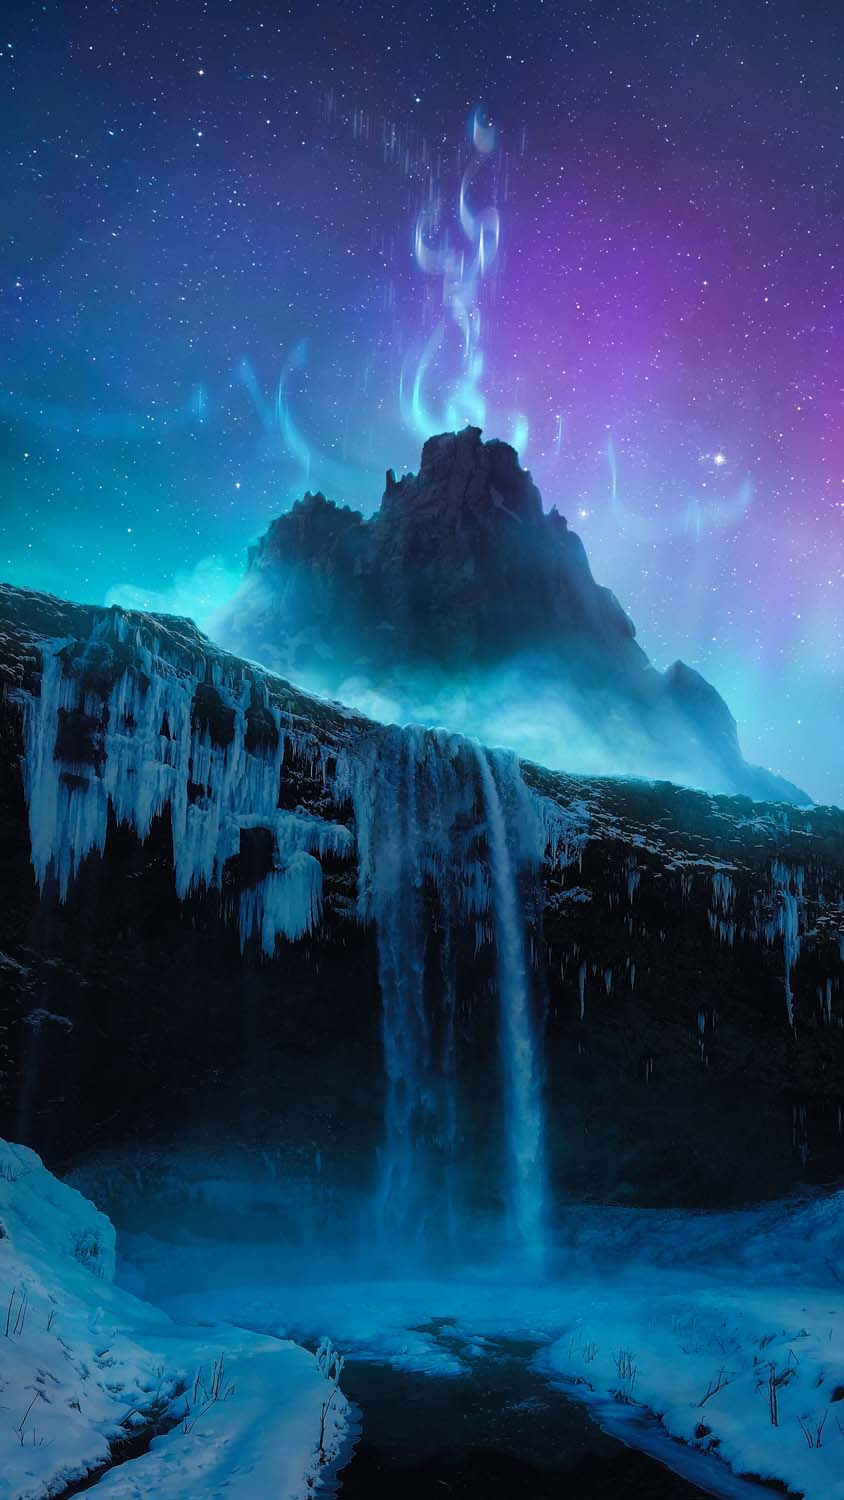 Aurora borealis Wallpaper for iPhone 11 Pro Max X 8 7 6  Free  Download on 3Wallpapers